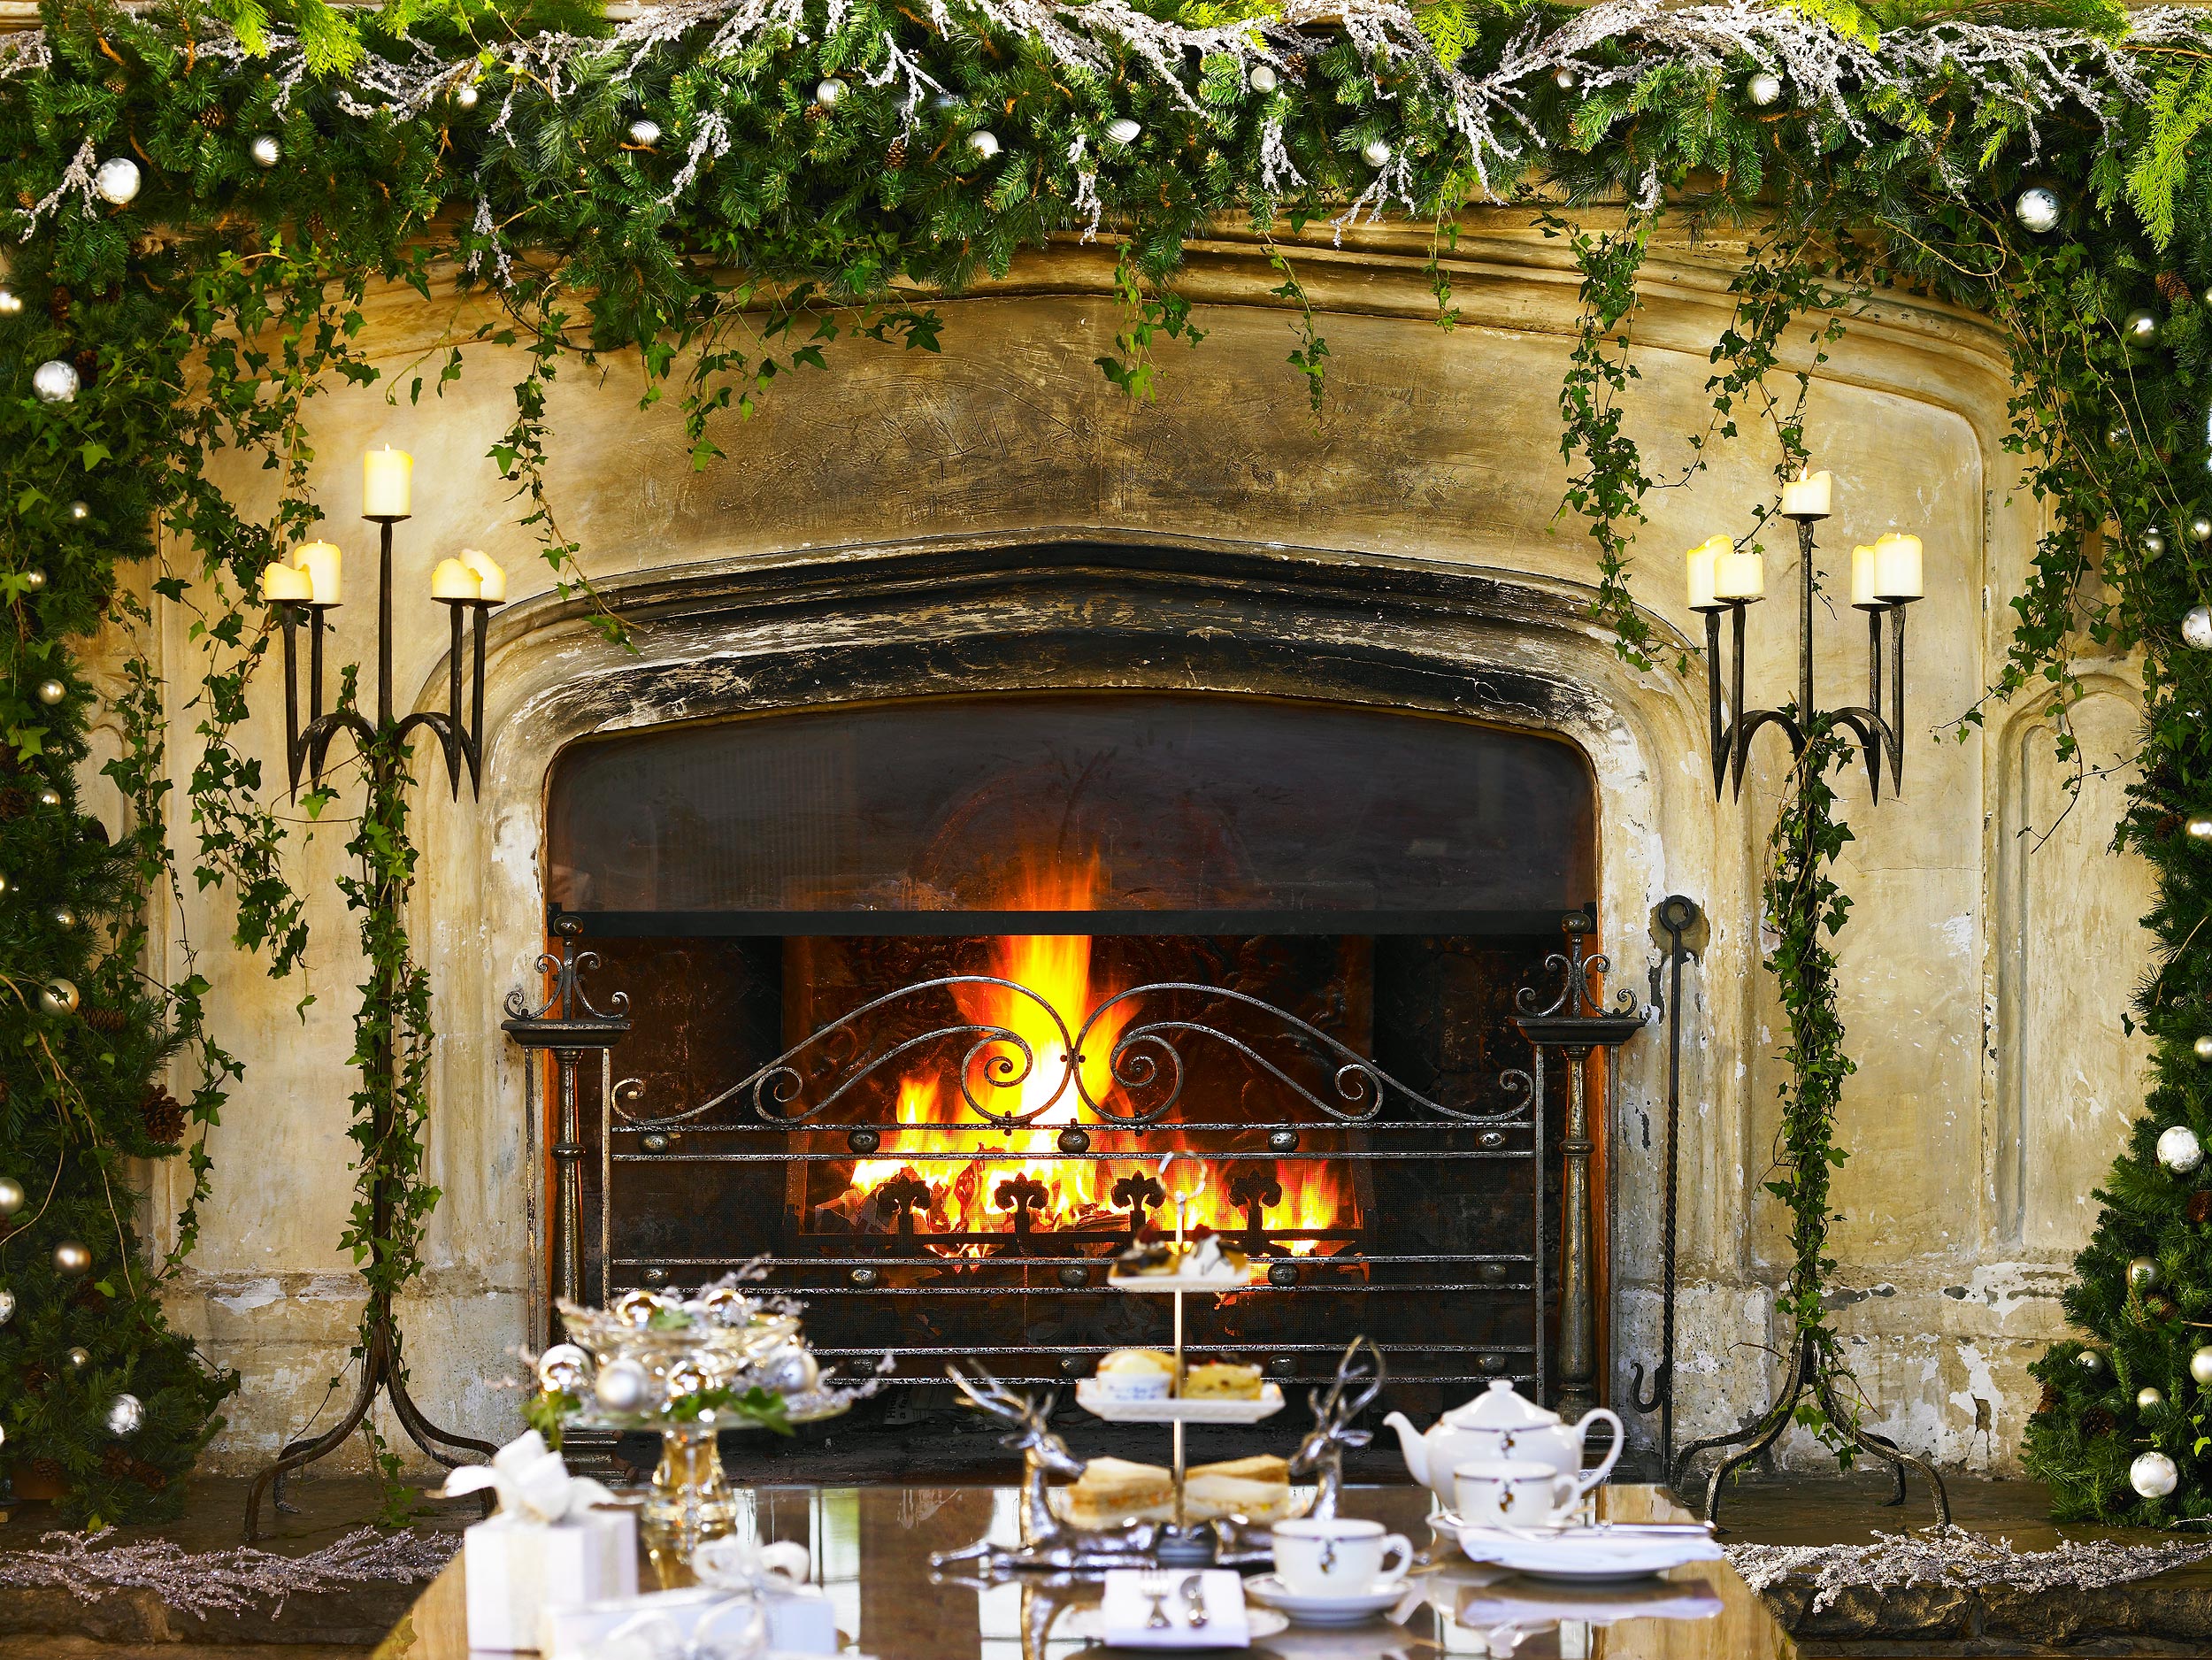 The fireplace at Fawsley Hall hotel & spa, Northamptonshire, UK.  Resort photography by Mike Caldwell